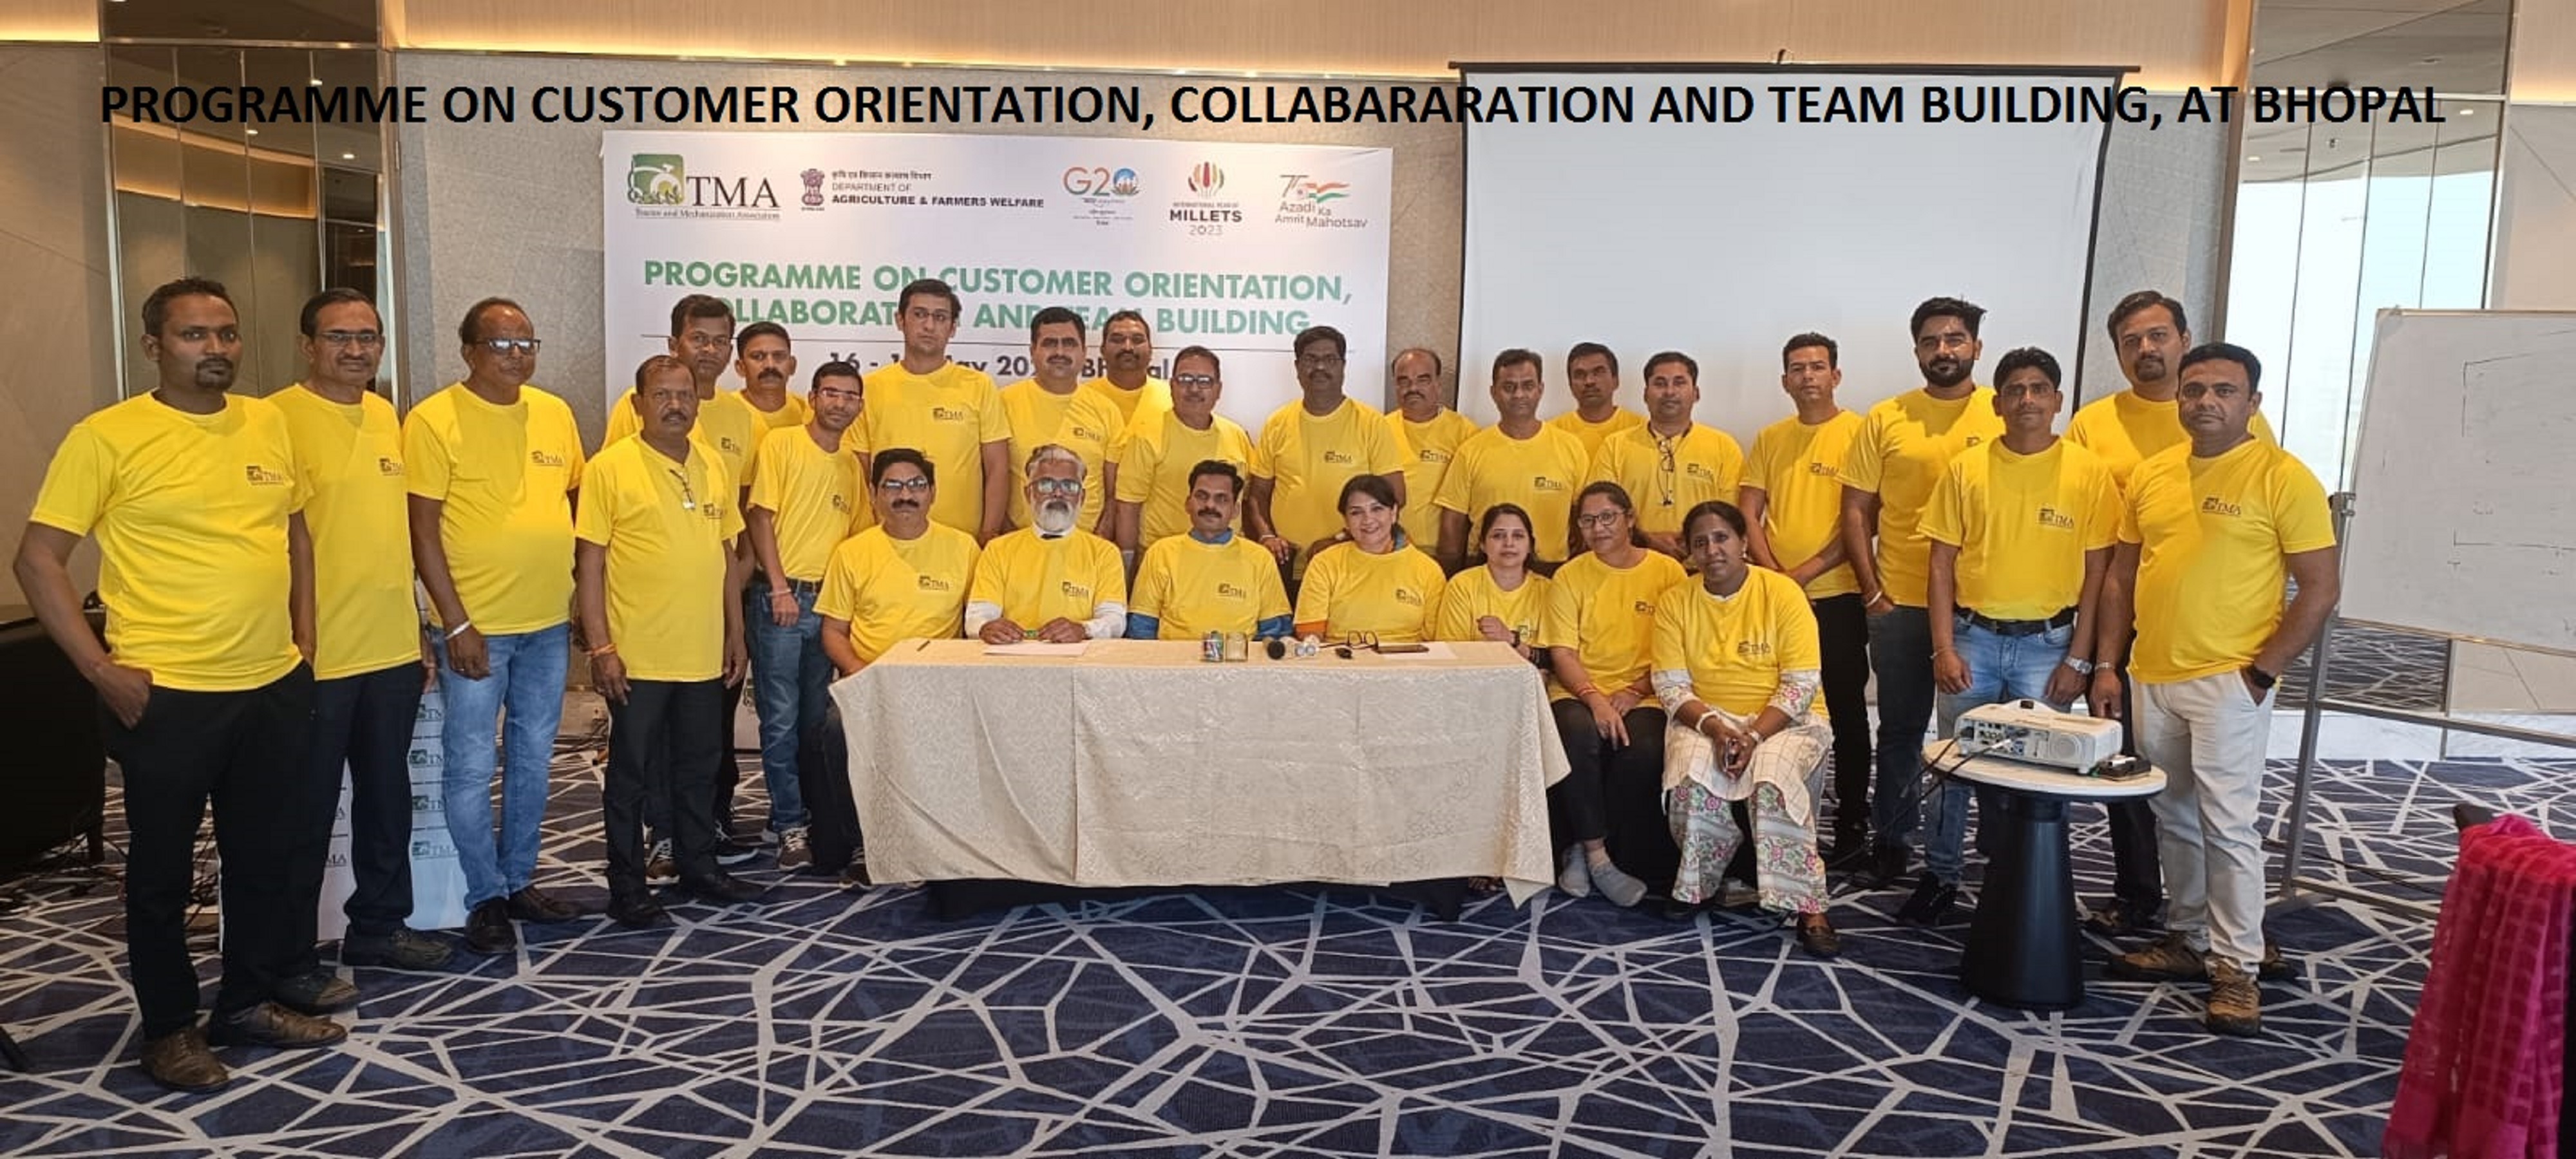 PROGRAMME ON CUSTOMER ORIENTATION, COLLABARRATION AND TEAM BUILDING